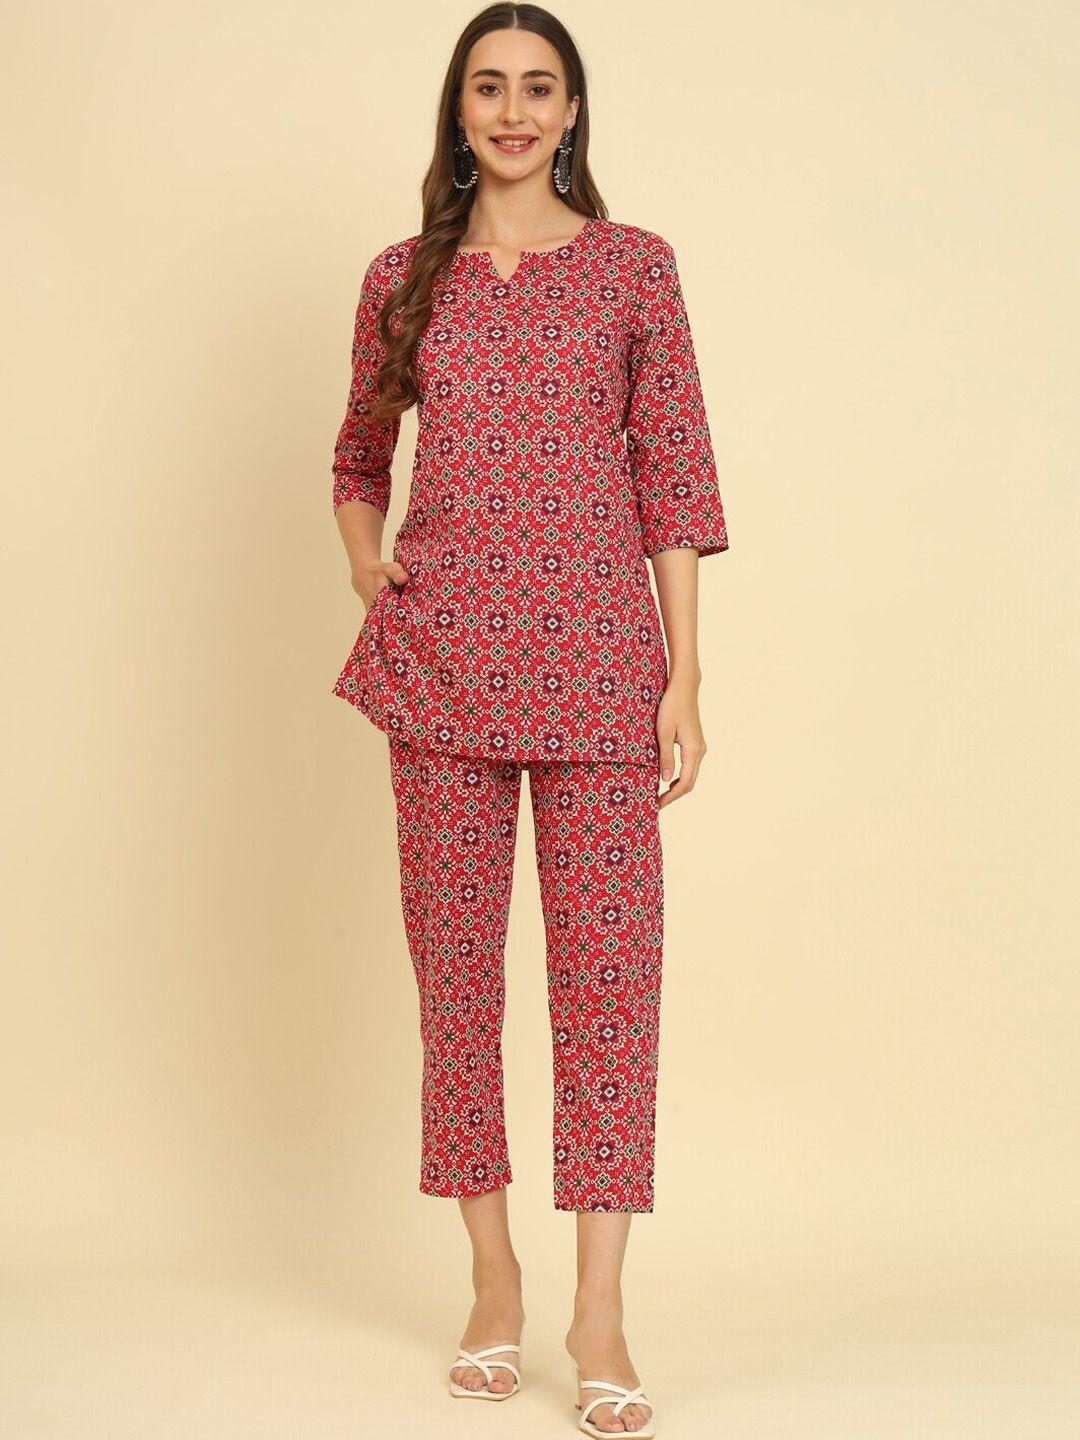 sutidora ethnic motifs printed pure cotton kurti with trousers